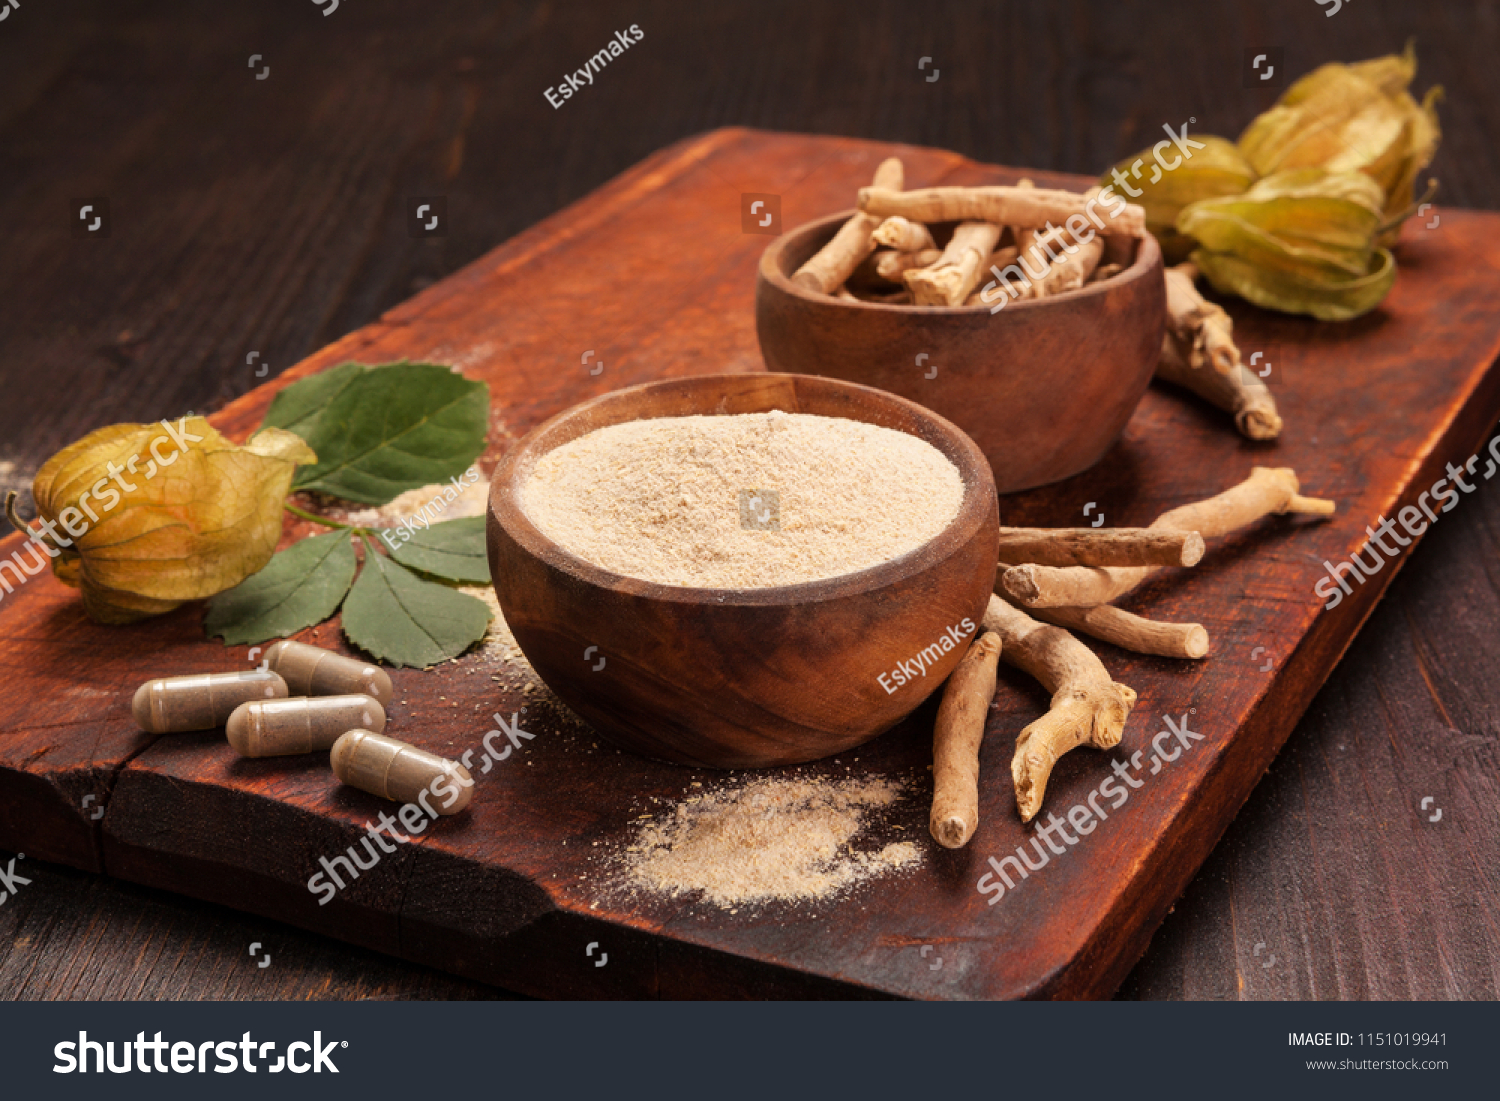 Roots and powder of Ashwagandha also known as Indian ginseng on wooden background. Hair loss, anti cancer, testosteron and depression benefits. #1151019941